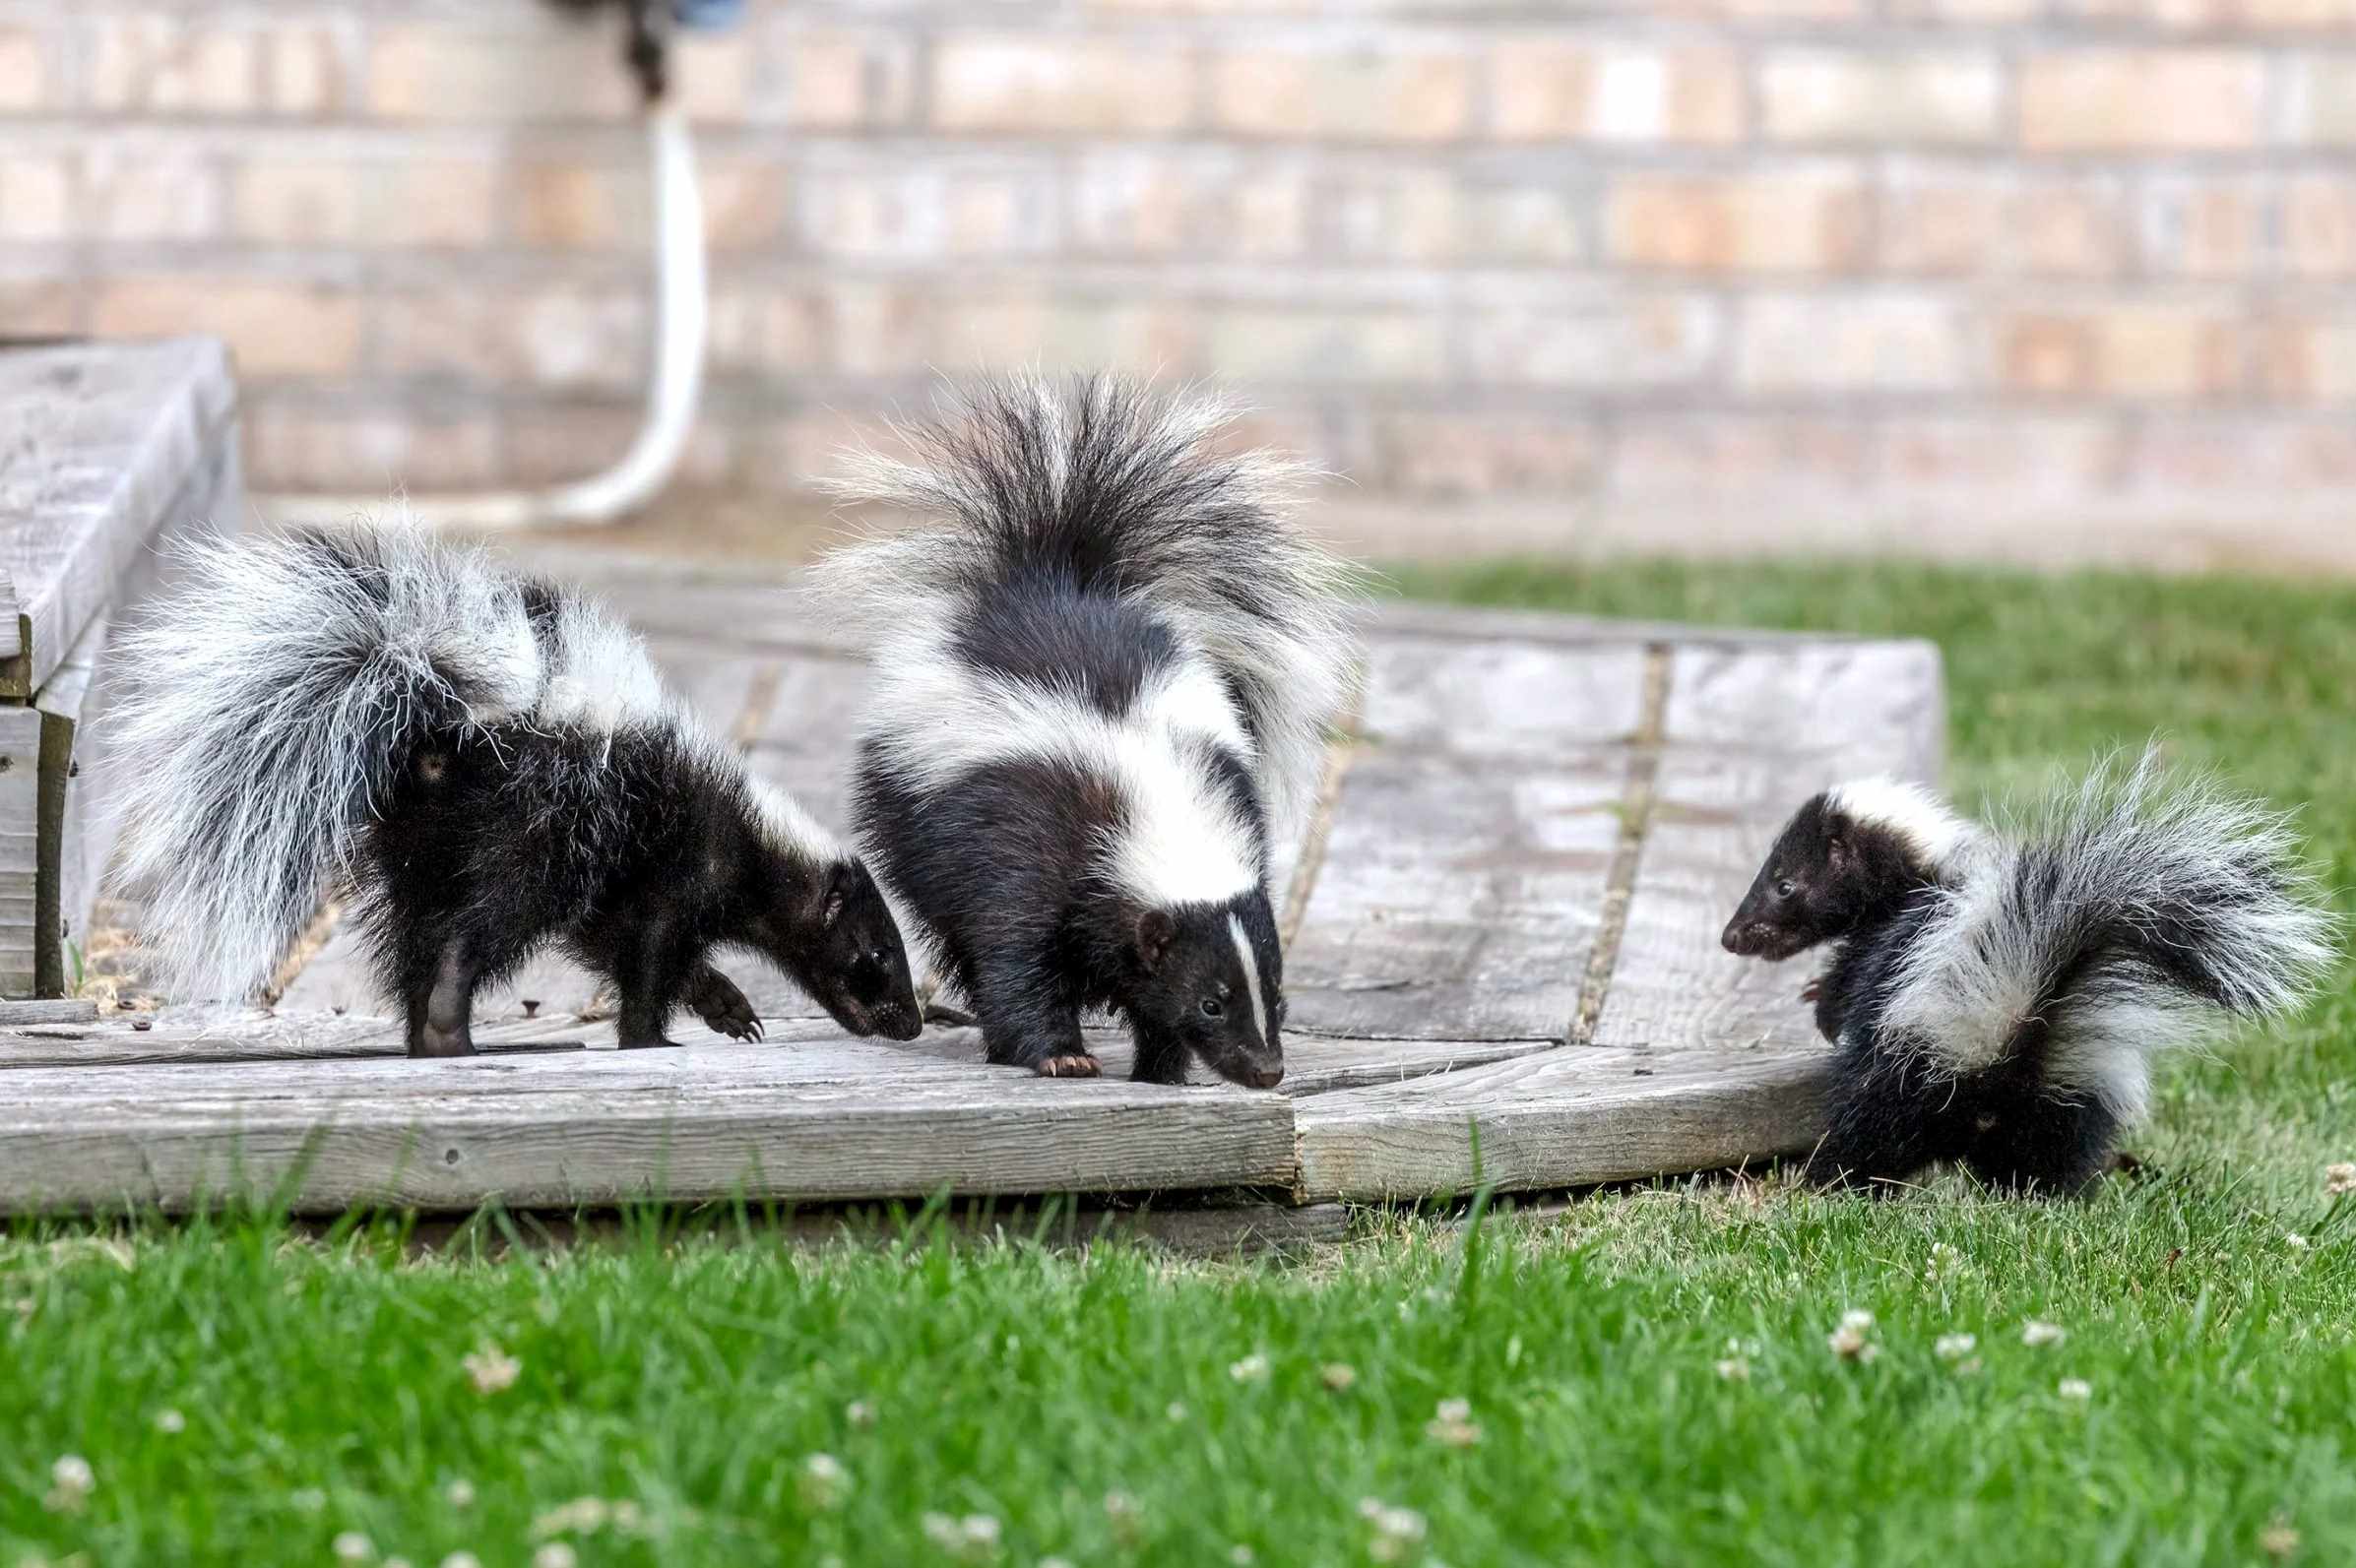 How To Get Rid Of A Skunk In Your Backyard